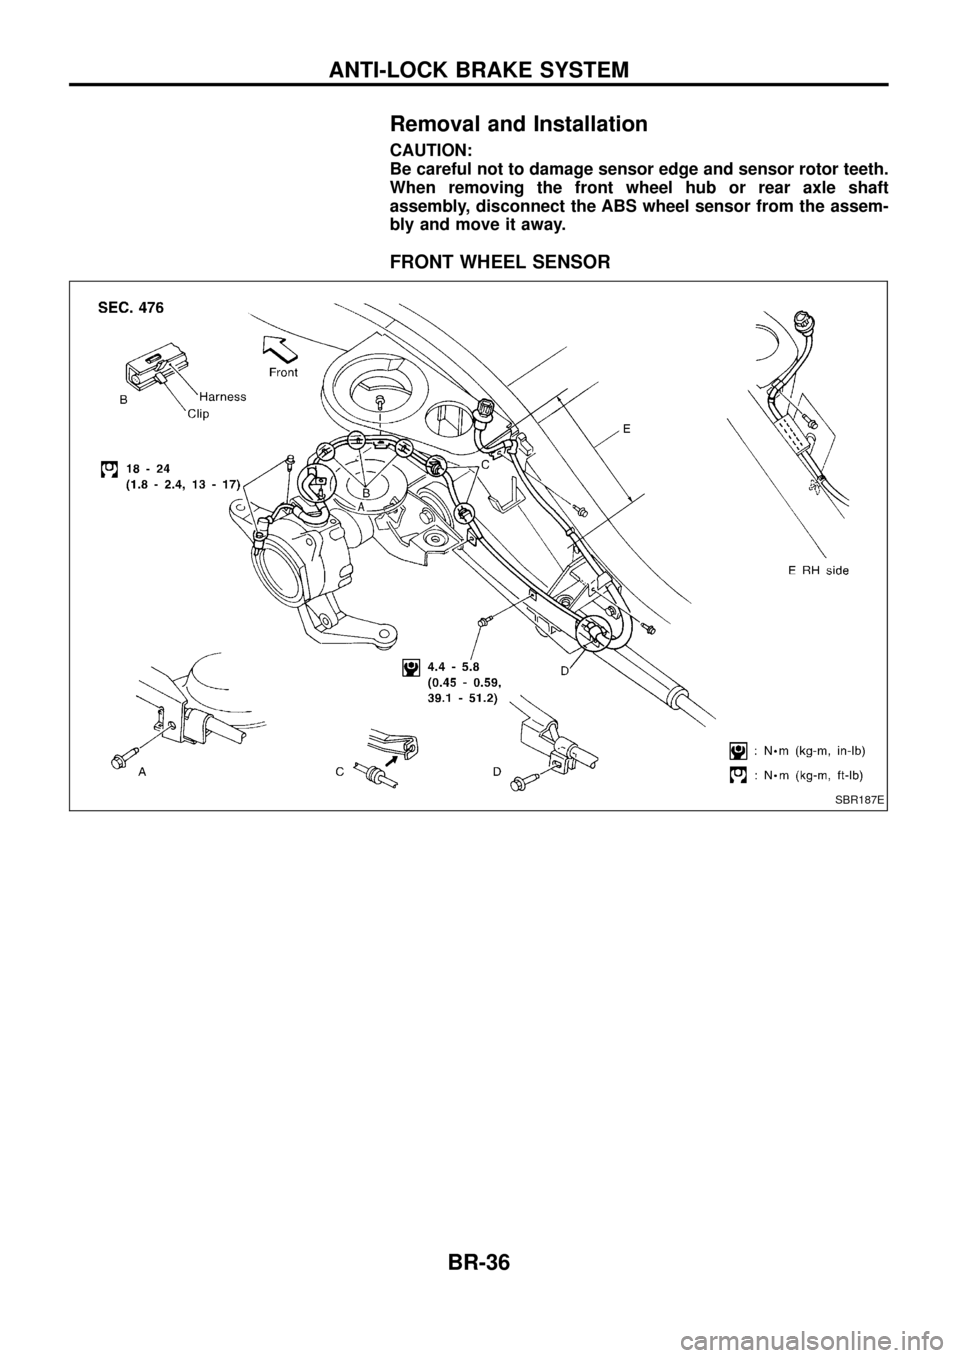 NISSAN PATROL 1998 Y61 / 5.G Brake System Owners Guide Removal and Installation
CAUTION:
Be careful not to damage sensor edge and sensor rotor teeth.
When removing the front wheel hub or rear axle shaft
assembly, disconnect the ABS wheel sensor from the a